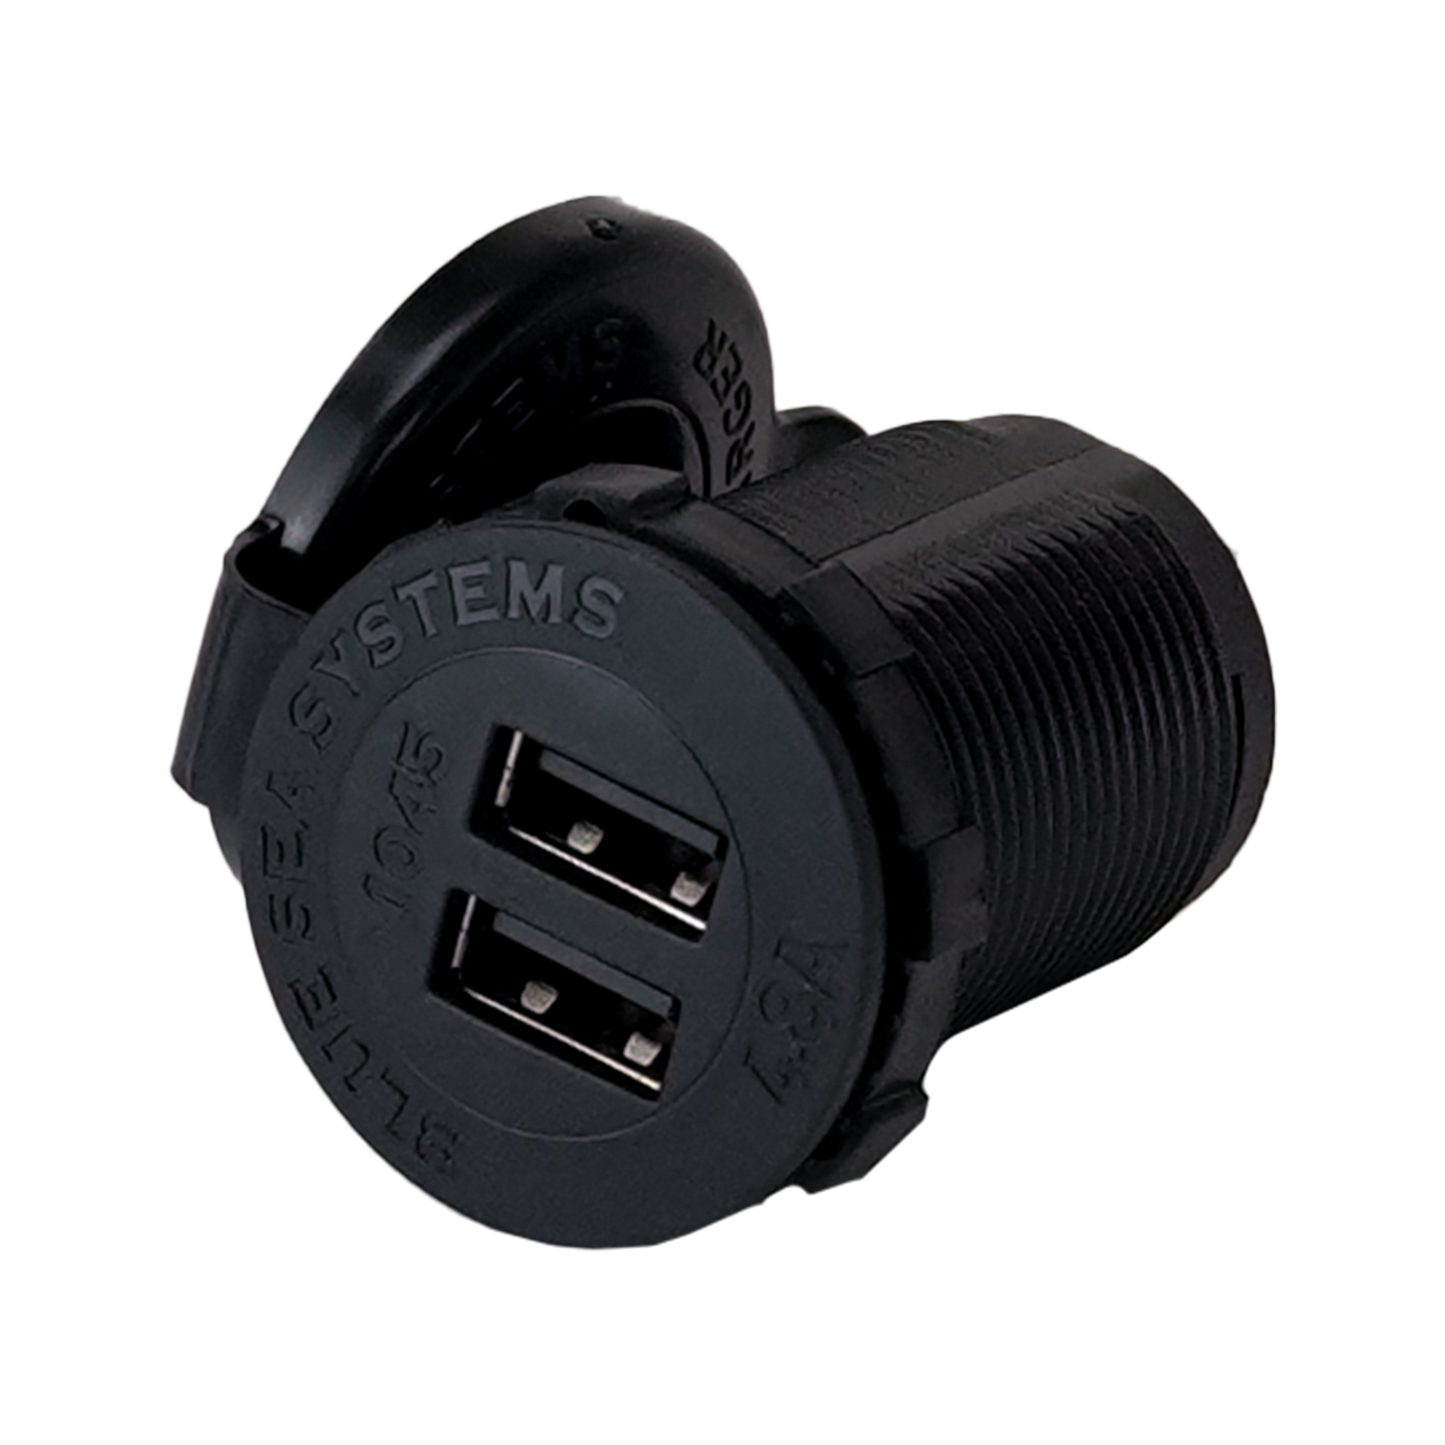 Blue Sea Systems 12/24VDC Dual USB Charger 4.8A Socket